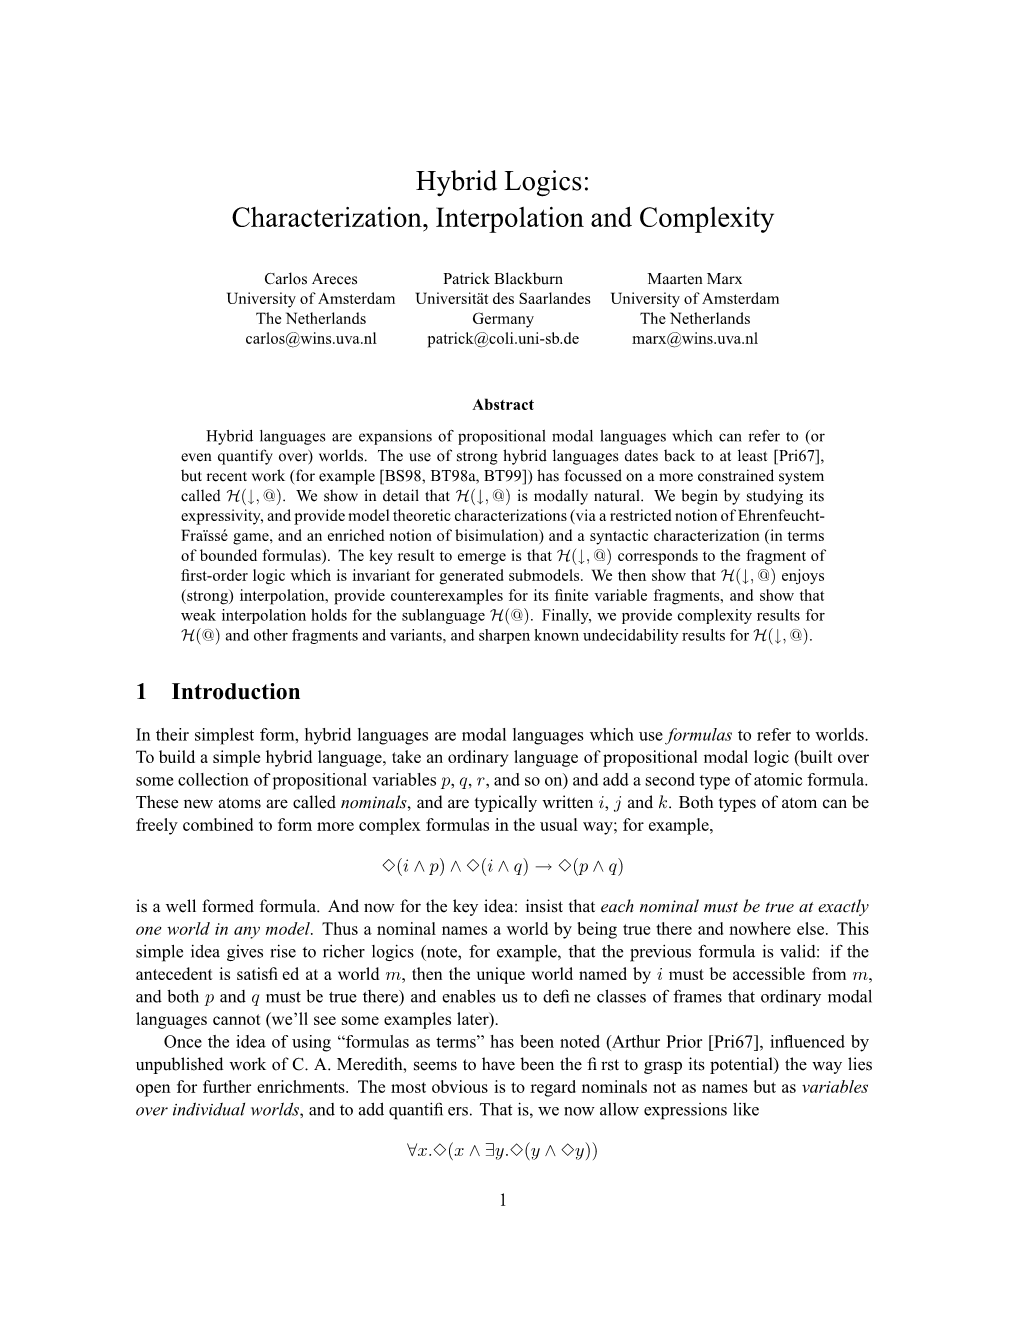 Hybrid Logics: Characterization, Interpolation and Complexity